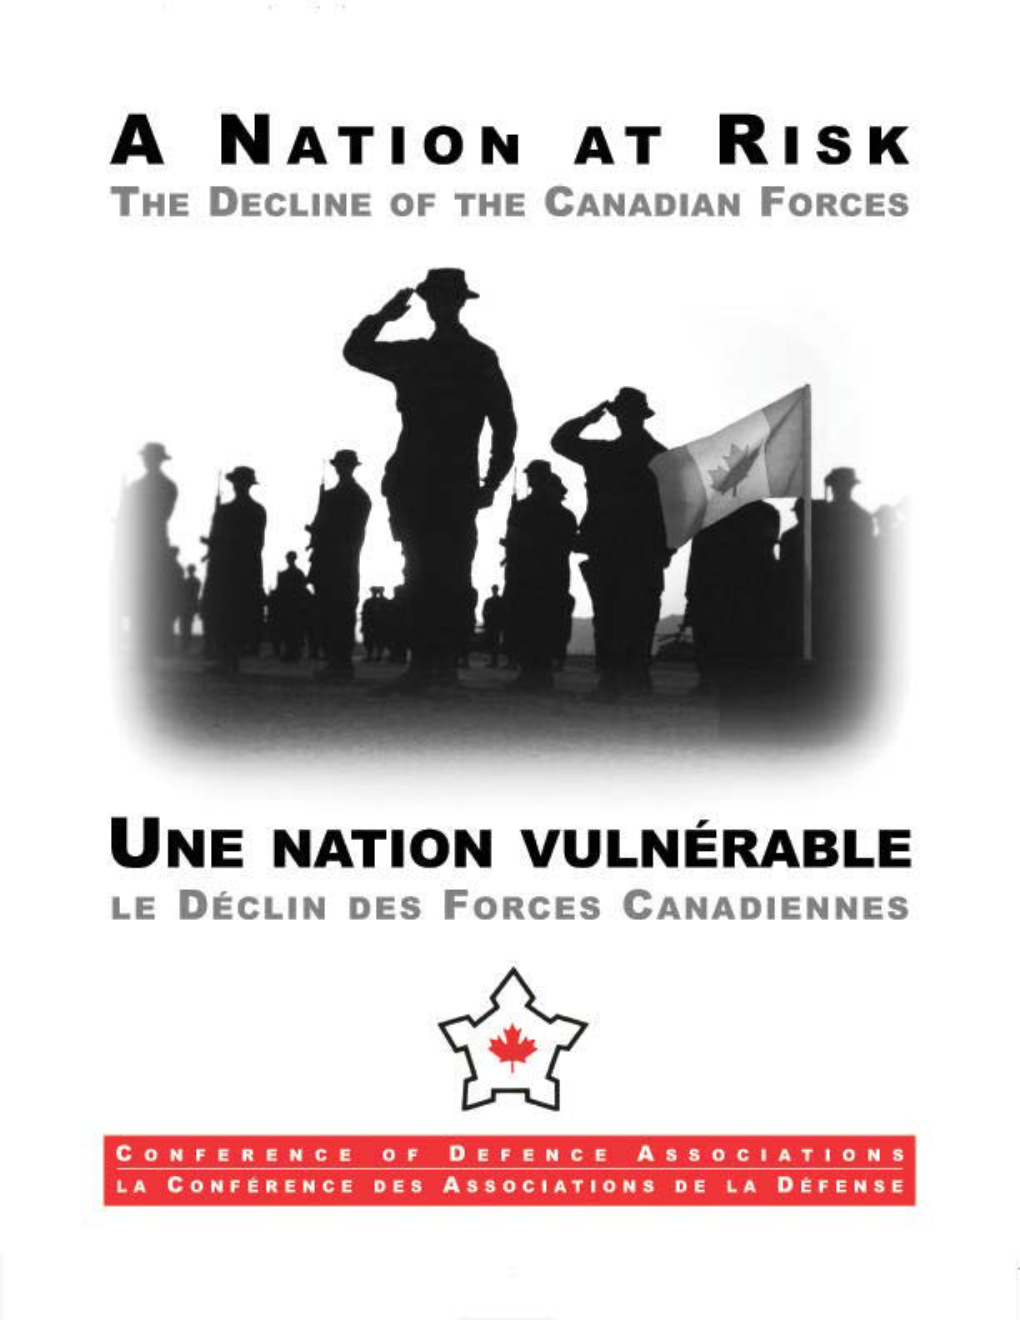 A Nation at Risk: the Decline of the Canadian Forces